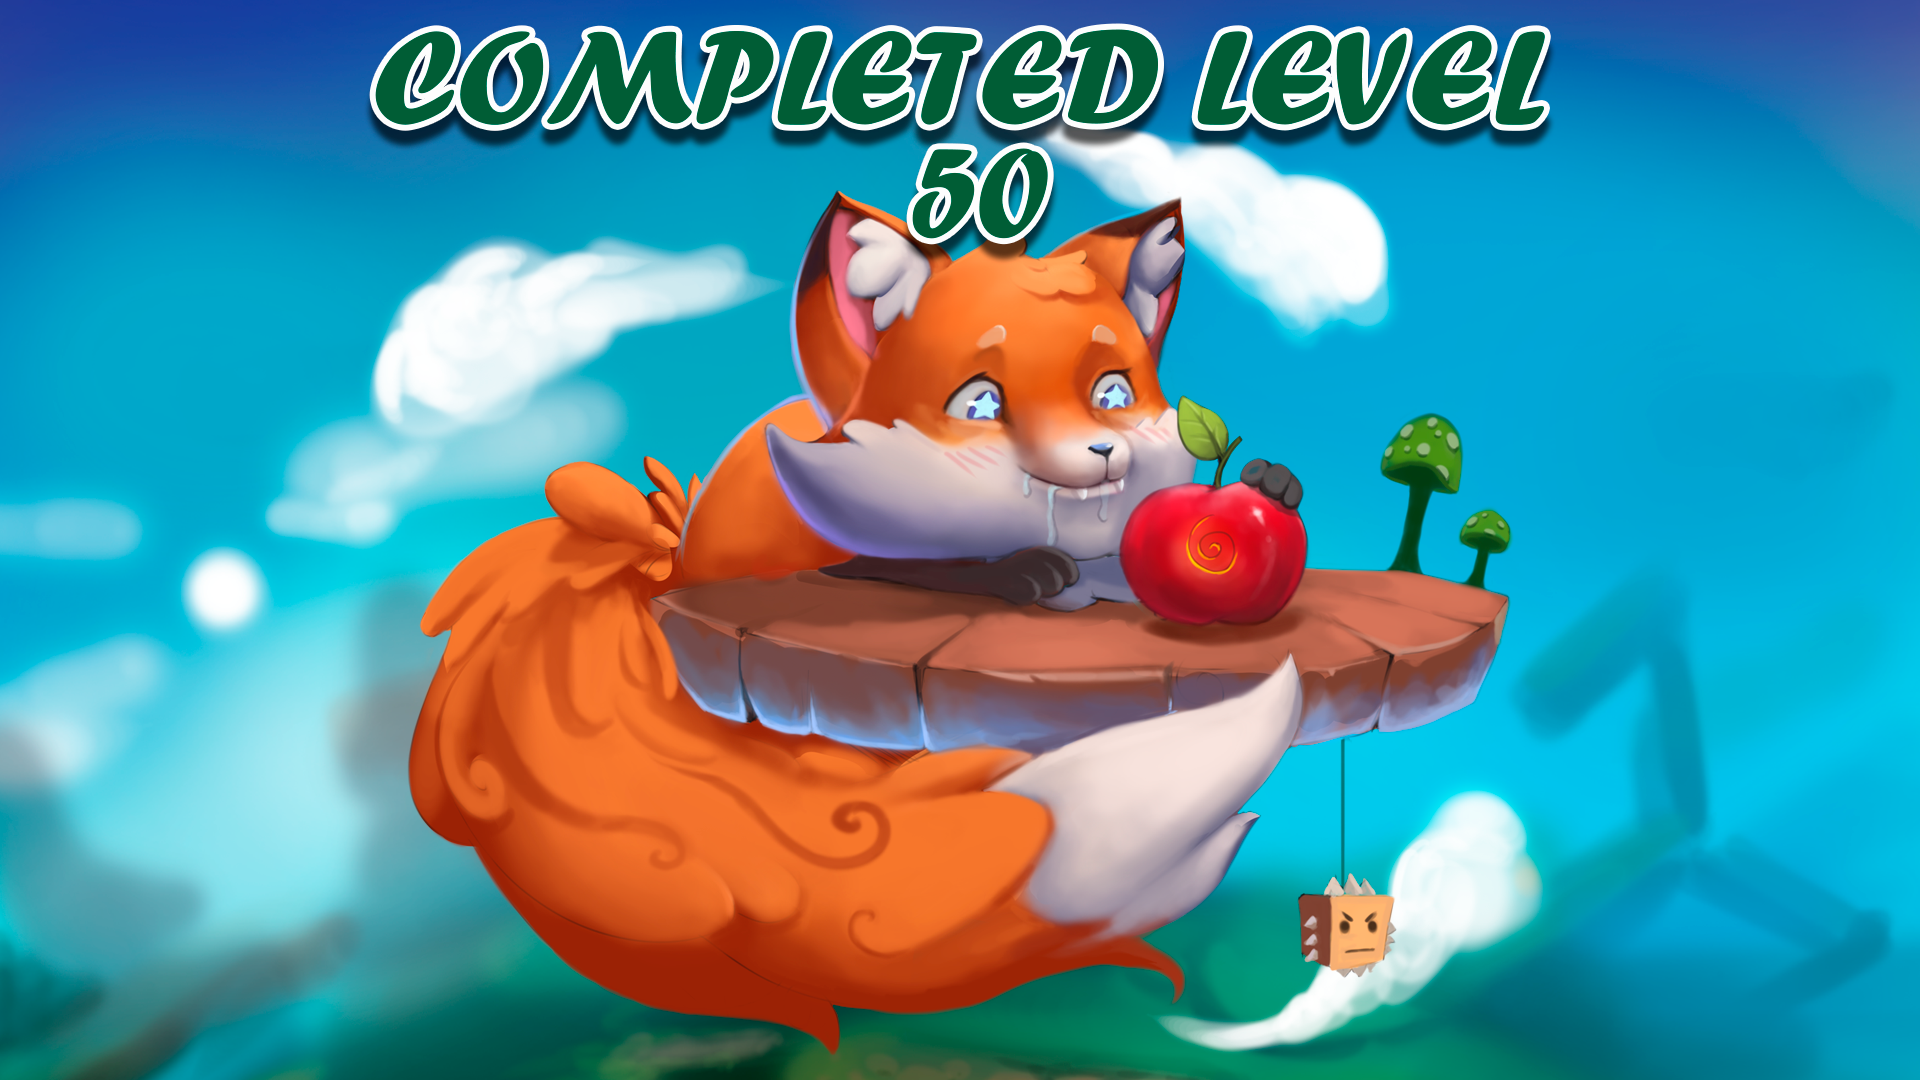 Icon for 50 levels completed